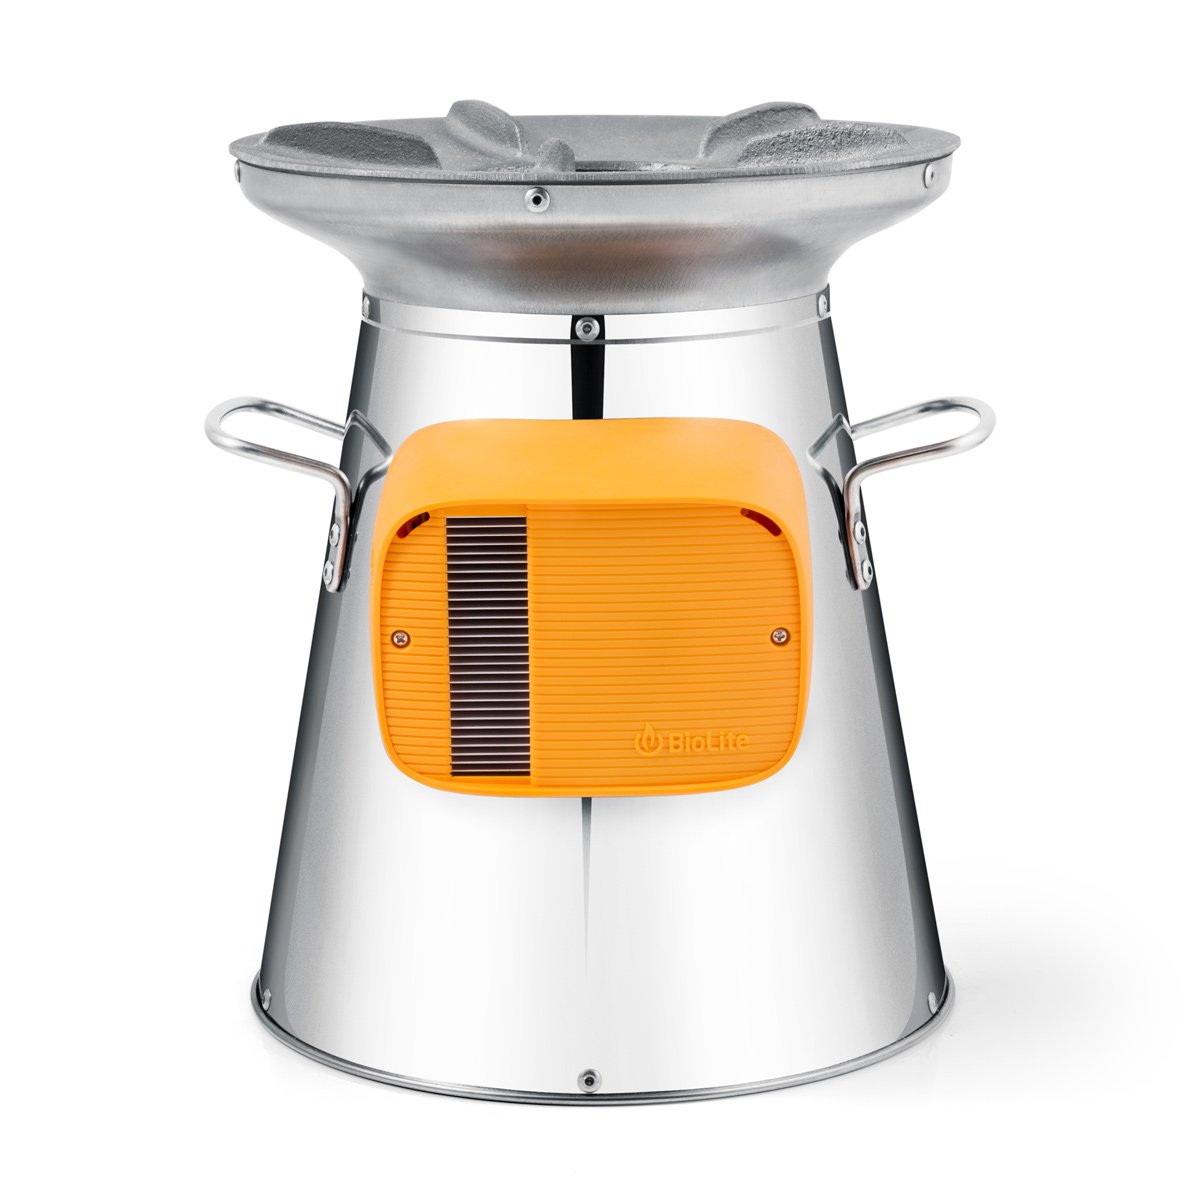 Biolite Homestove, stainless steel design with battery pack